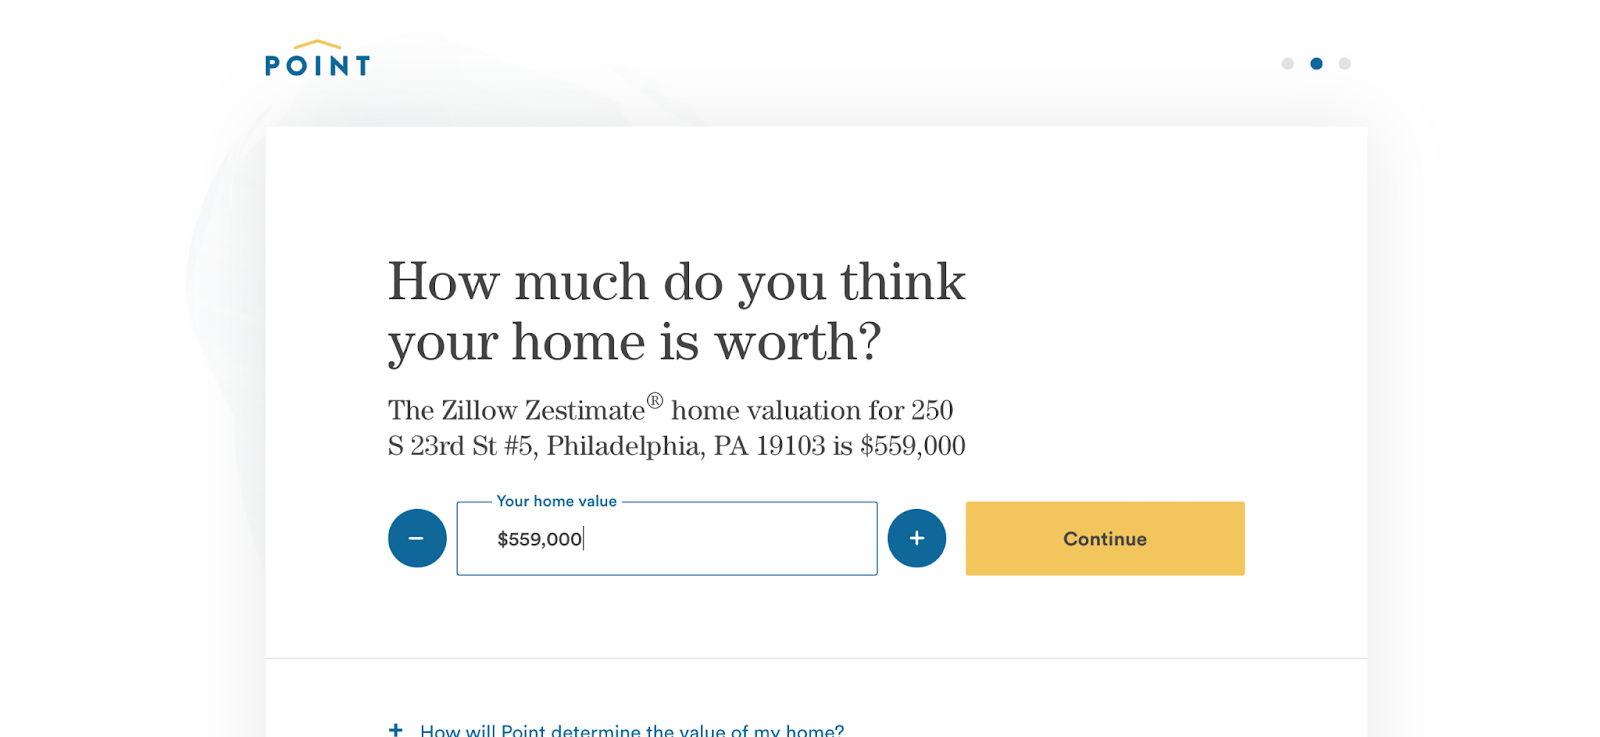 Point prompt asking "How much do you think your home is worth?"